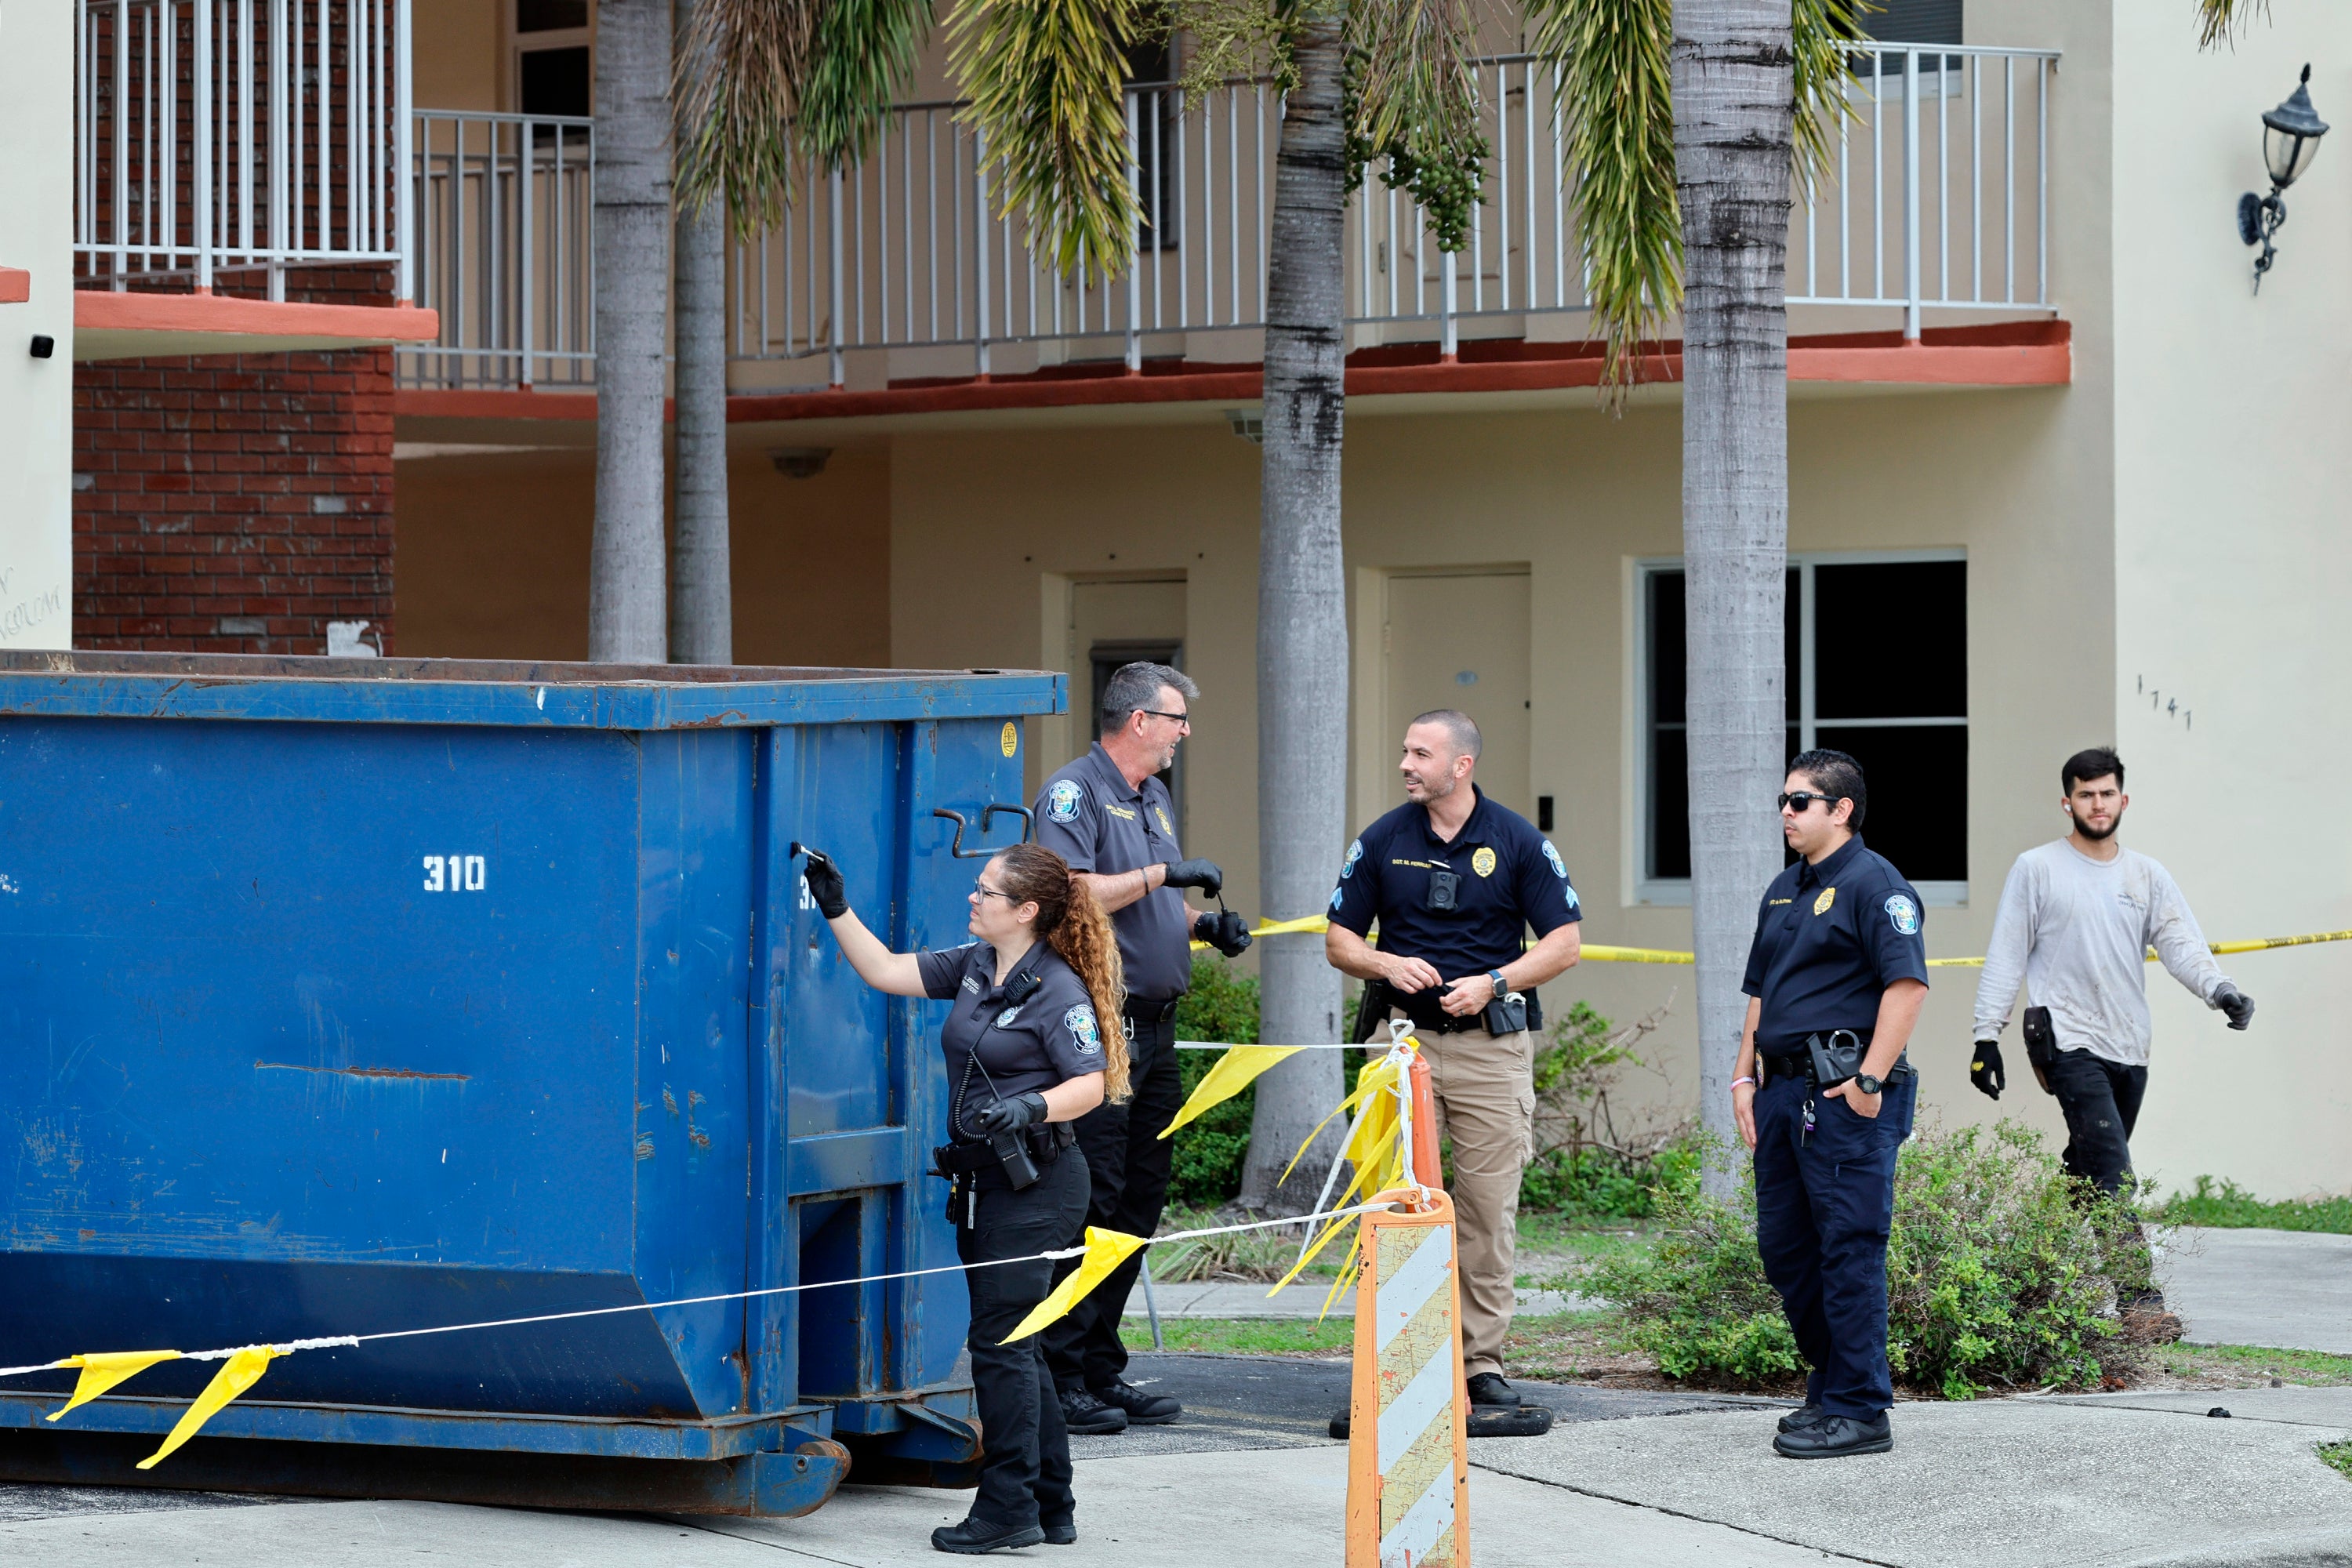 A crime scene investigator dusts for fingerprints at a large trash bin outside of an apartment complex in Hollywood, Florida, where construction workers found a dead baby on 8 January